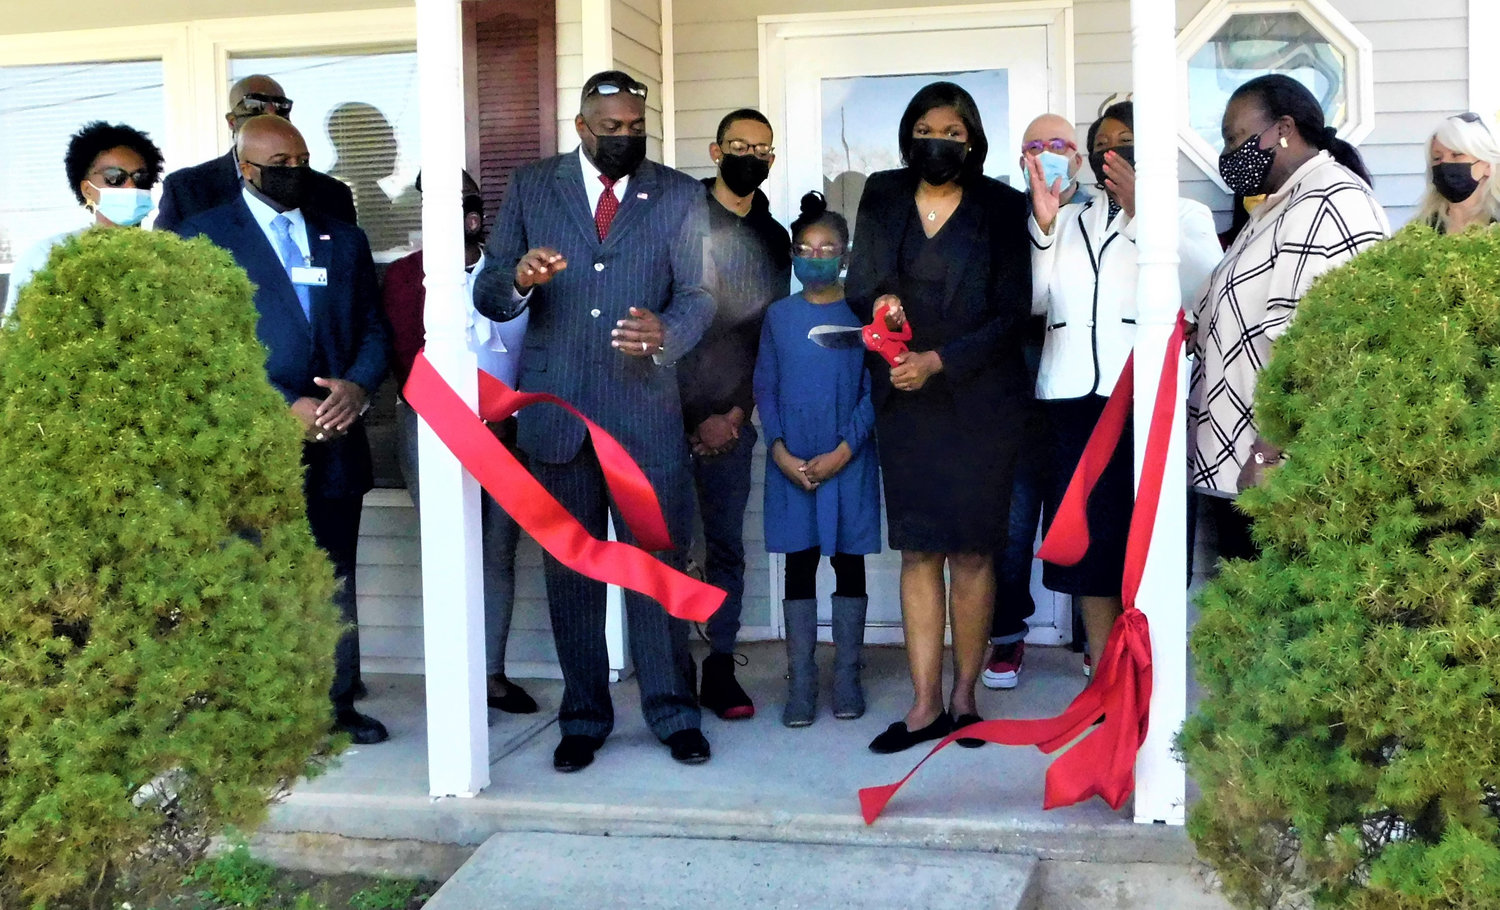 Jarren and Kailyn Style look on as their mother, Kimberly Style, cuts the ribbon to inaugurate their new home. Applauding them are Hempstead Mayor Waylyn Hobbs, Jr., and other dignitaries.